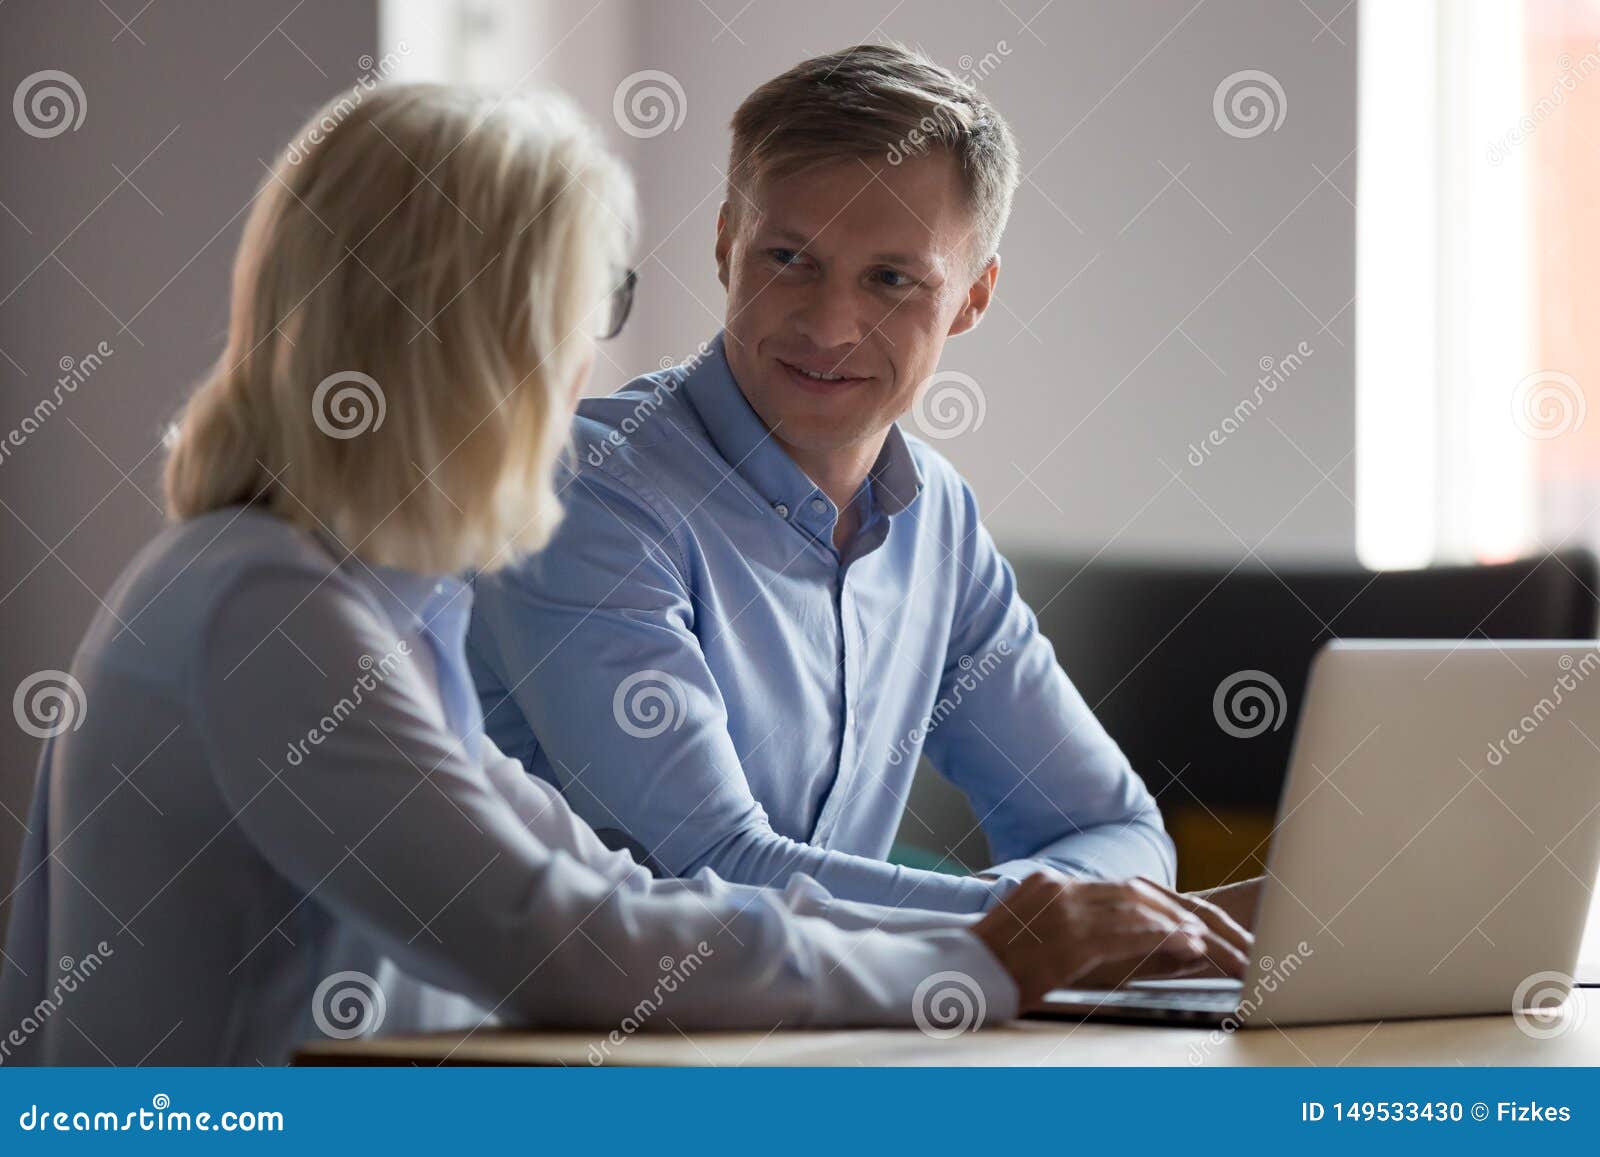 trainee talking with mature businesswoman, mentor, working together